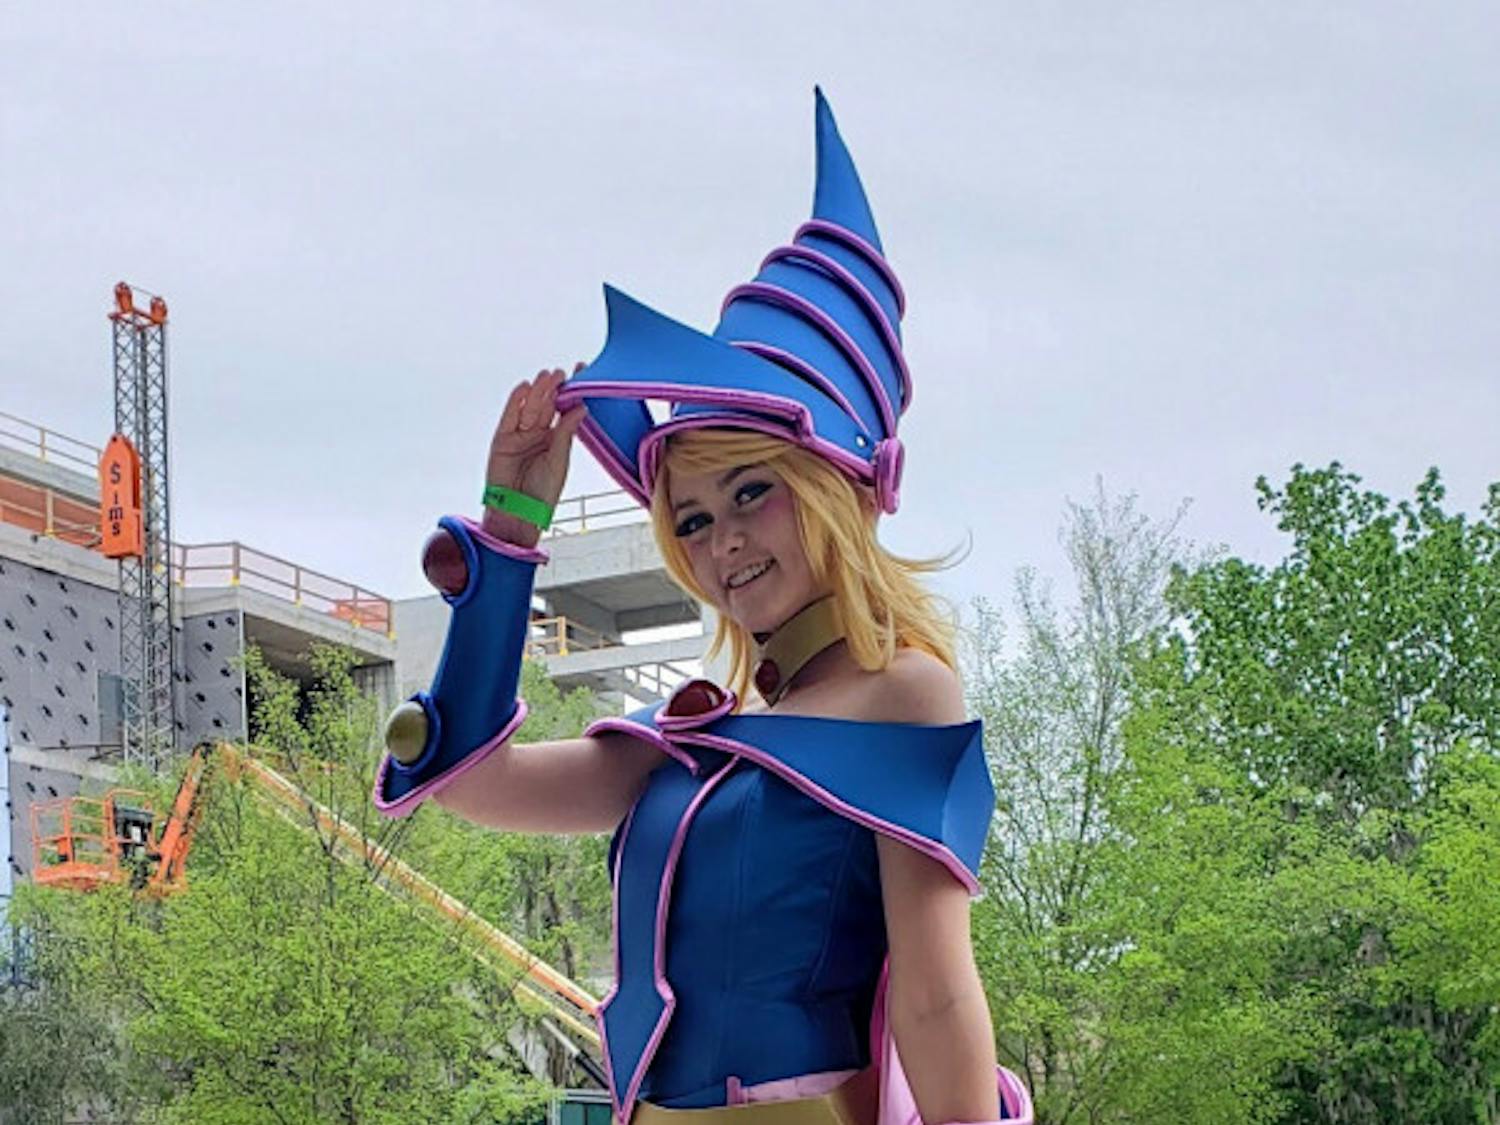 Dark Magician GirlGabby Guinn, 20, came from Vero Beach, Florida, to attend SwampCon and show off her cosplay as Dark Magician Girl from the popular anime, “Yu-Gi-Oh!” According to Guinn, the cosplay took a month and a half to complete and is mostly made out of foam and glittery fabric.“Cosplay who you love,” she advises first-time cosplayers. “Whoever you cosplay, make sure you do it because you love the character.” 